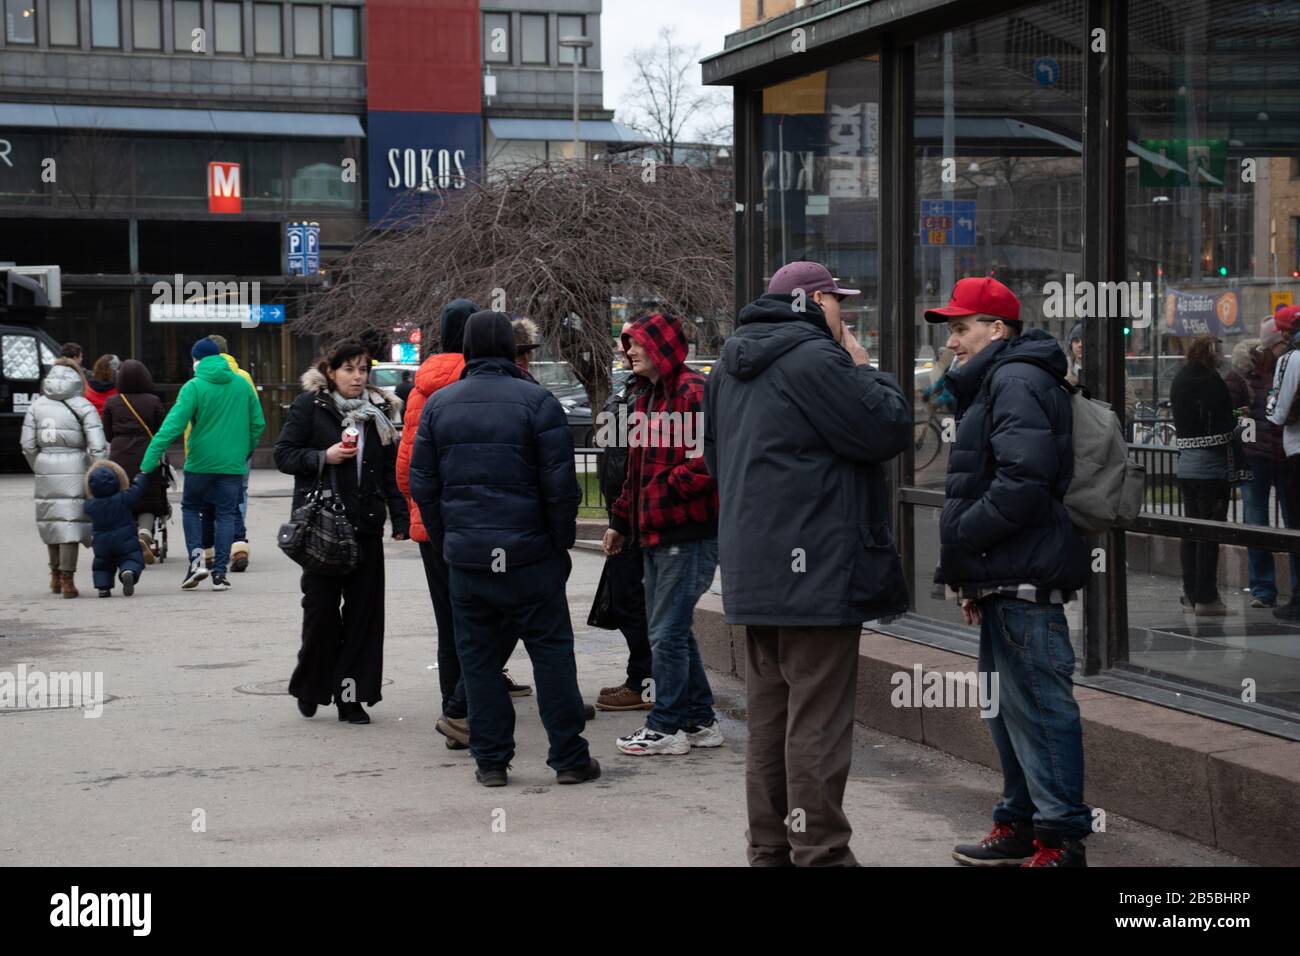 Helsinki, Finland - 3 March 2020: People standing and smoking, Illustrative Editorial Stock Photo